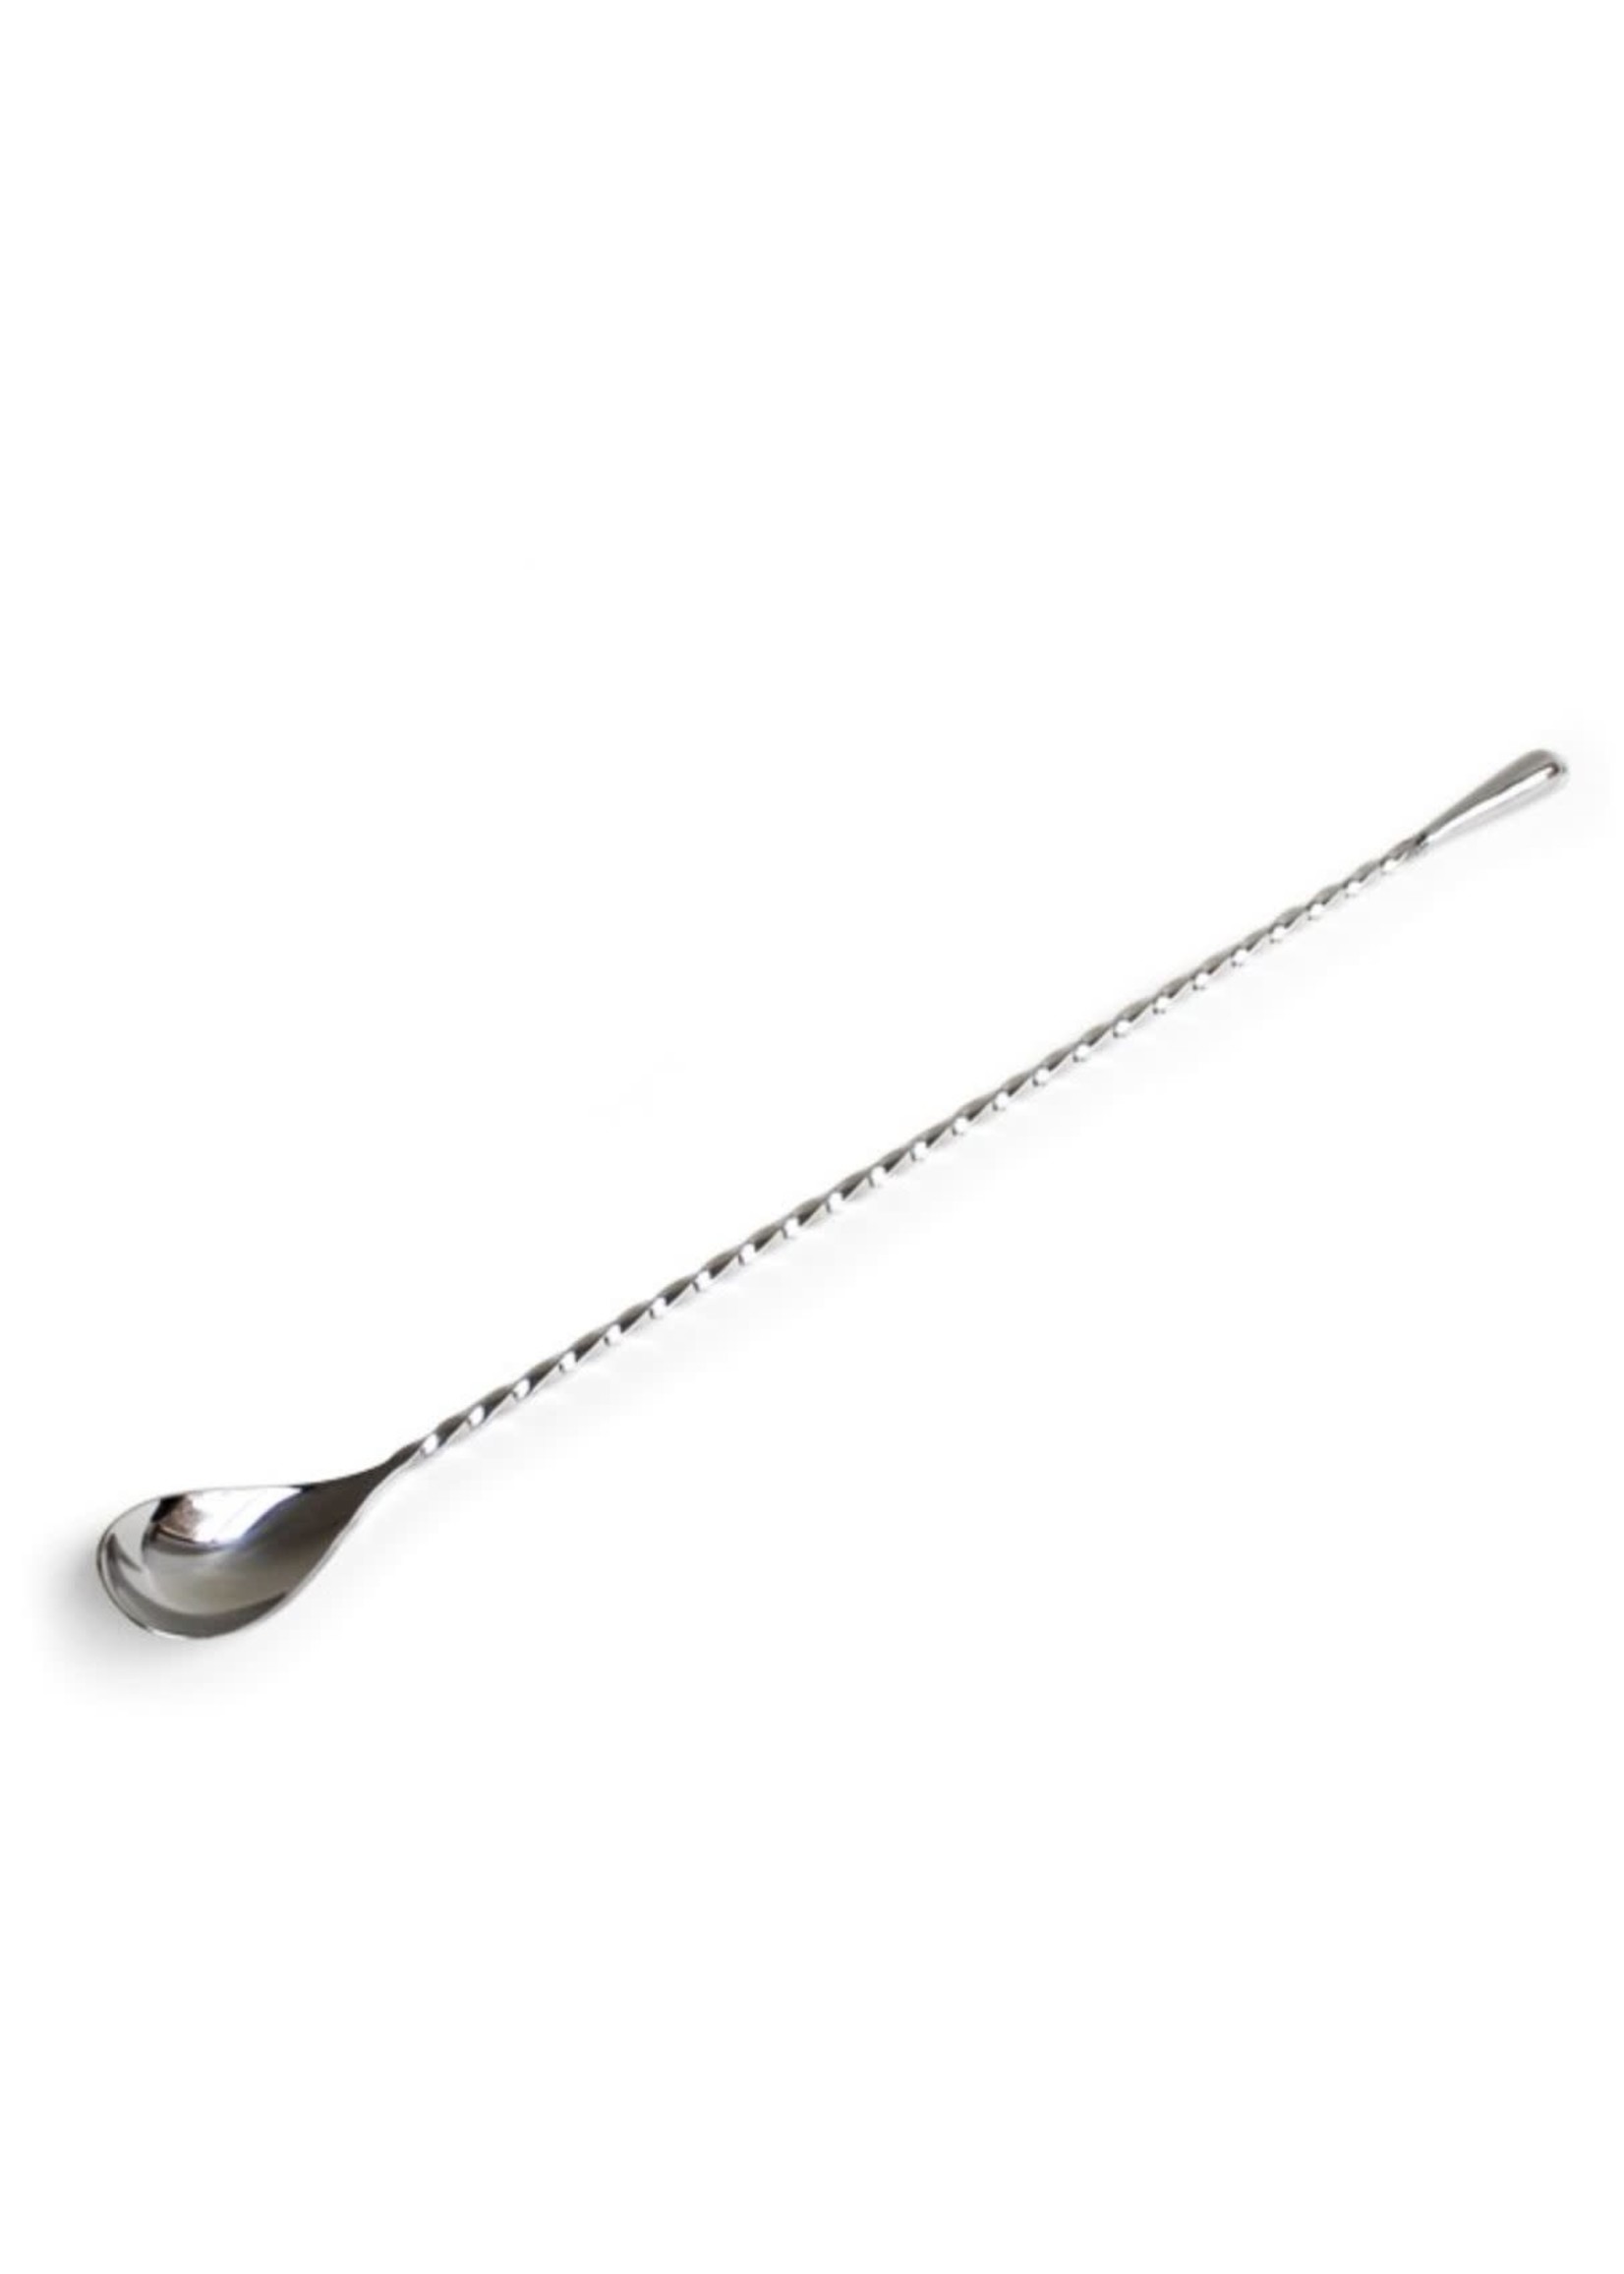 COCKTAIL SPOON